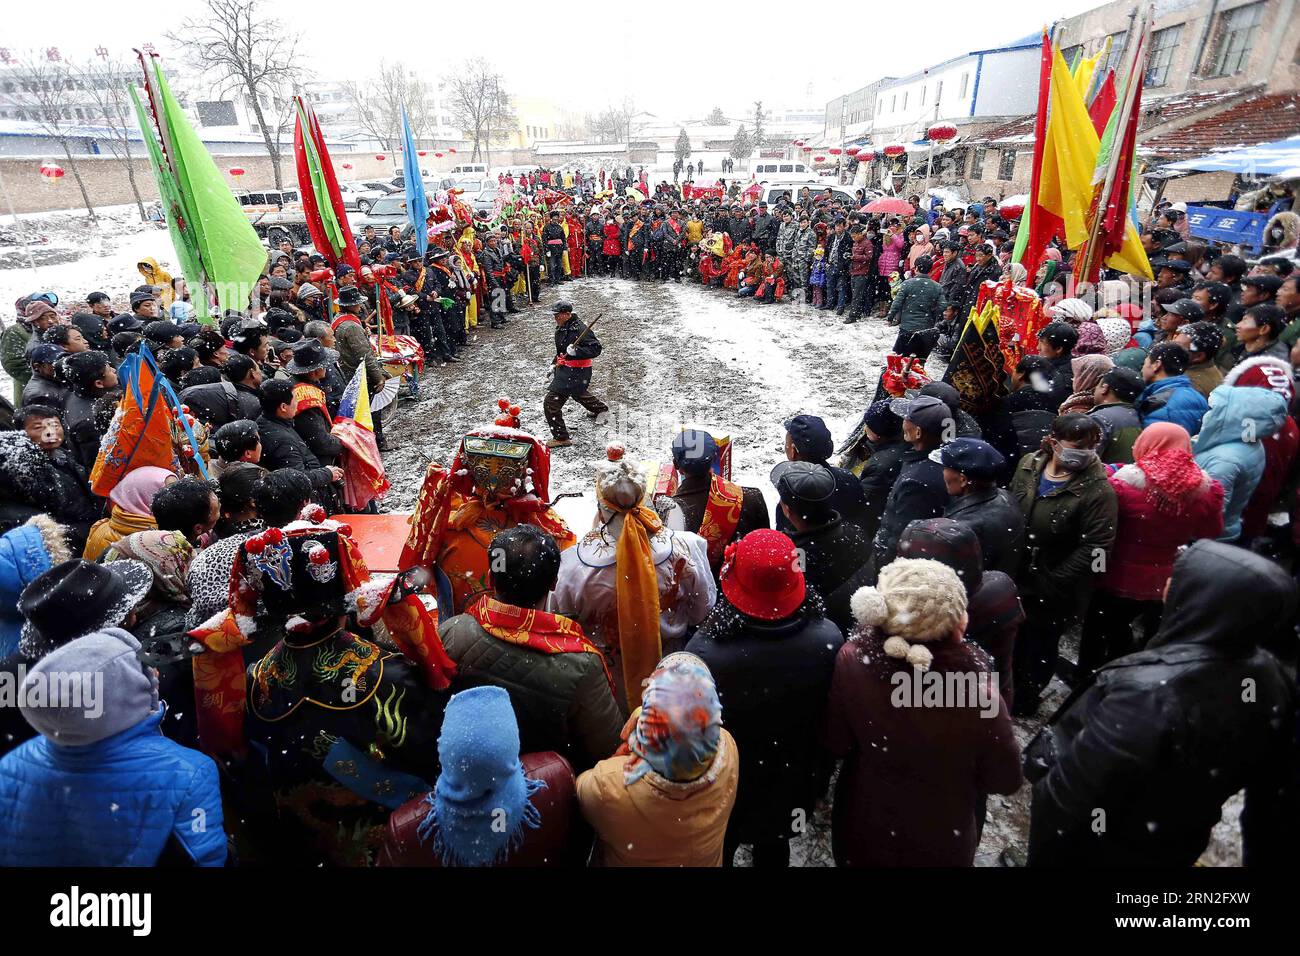 (150305) -- PINGLIANG, March 4, 2015 -- People gather to watch a martial art performance to celebrate the Lantern Festival in Pingliang City, northwest China s Gansu Province, March 4, 2015. The festival, which falls on March 4 this year, is celebrated on the 15th day of the Chinese Lunar New Year and marks the end of the Spring Festival. ) (lfj) CHINA-LANTERN FESTIVAL-CELEBRATIONS (CN) YangxXin PUBLICATIONxNOTxINxCHN   Pingliang March 4 2015 Celebrities gather to Watch a Martial Art Performance to Celebrate The Lantern Festival in Pingliang City Northwest China S Gansu Province March 4 2015 T Stock Photo